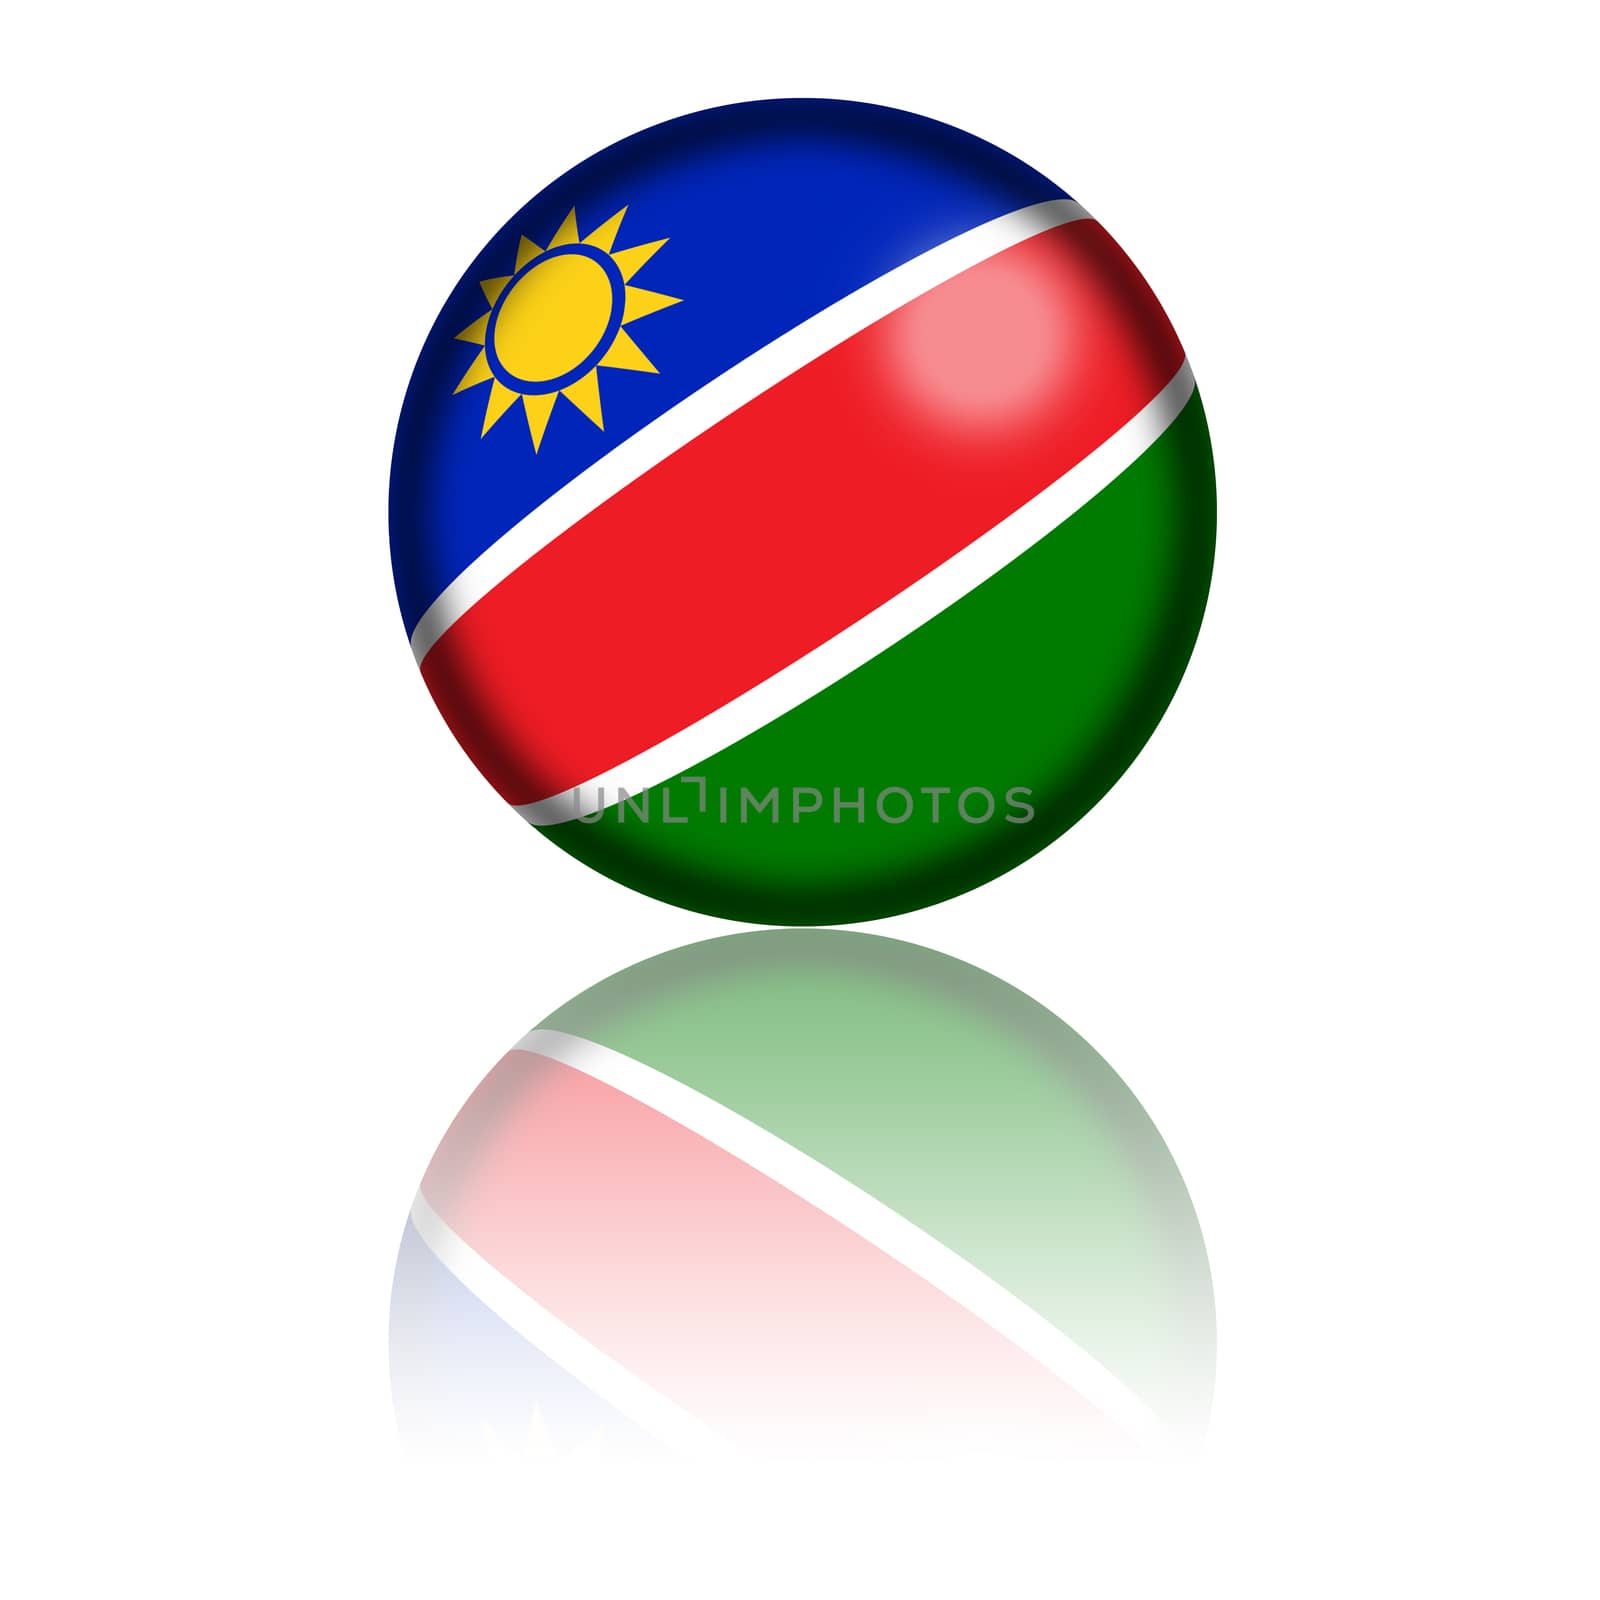 3D sphere or badge of Namibia flag with reflection at bottom.